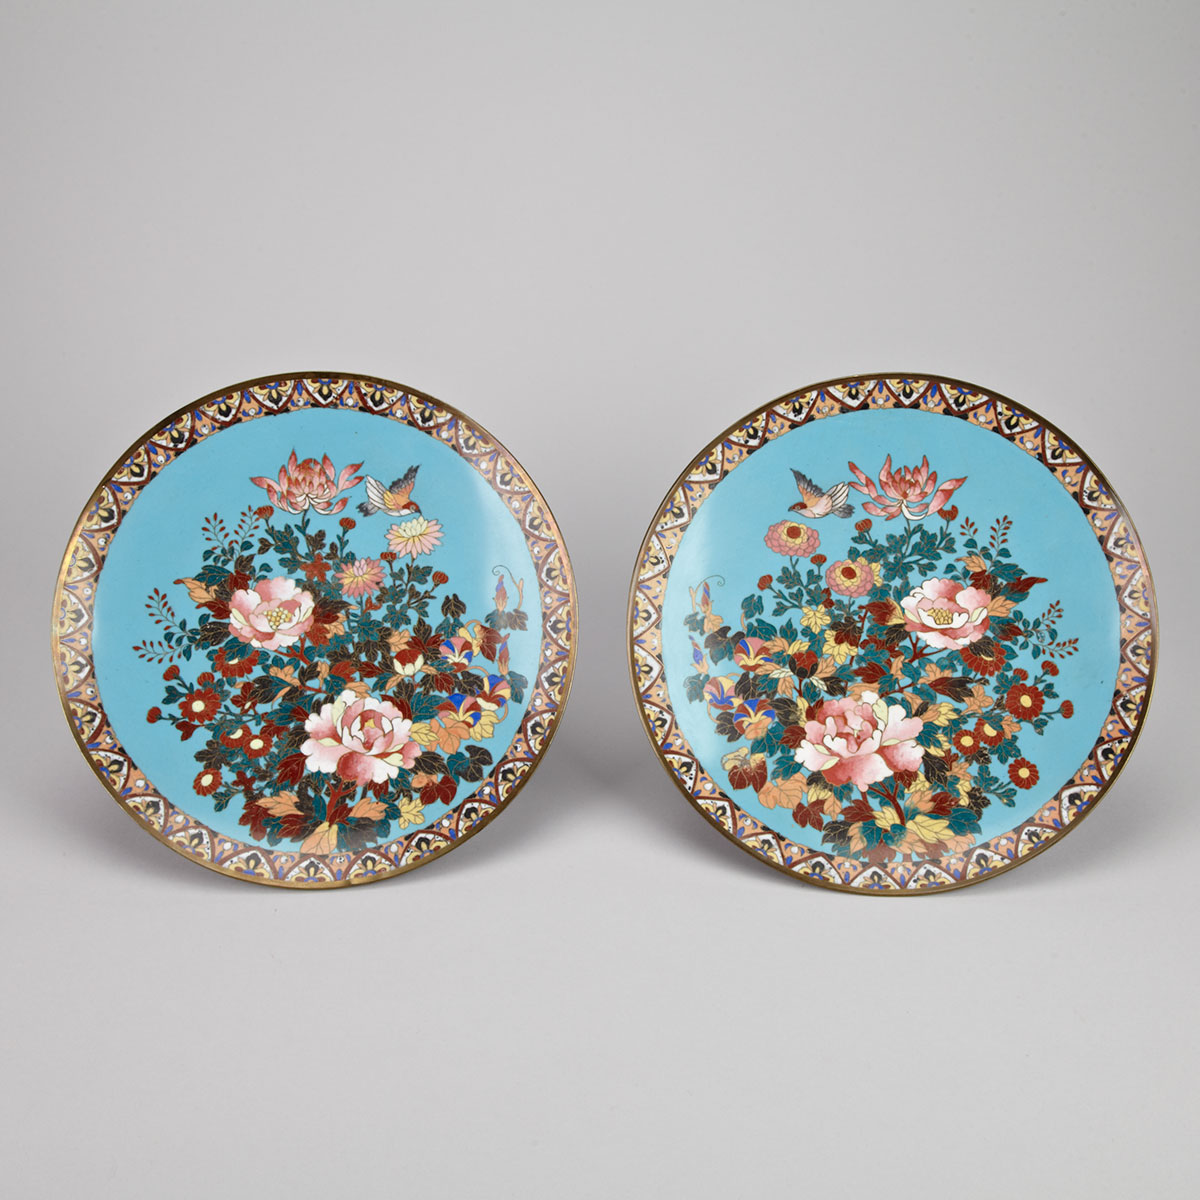 Pair of Cloisonné Enamel Fauna and Floral Plates, Early 20th Century